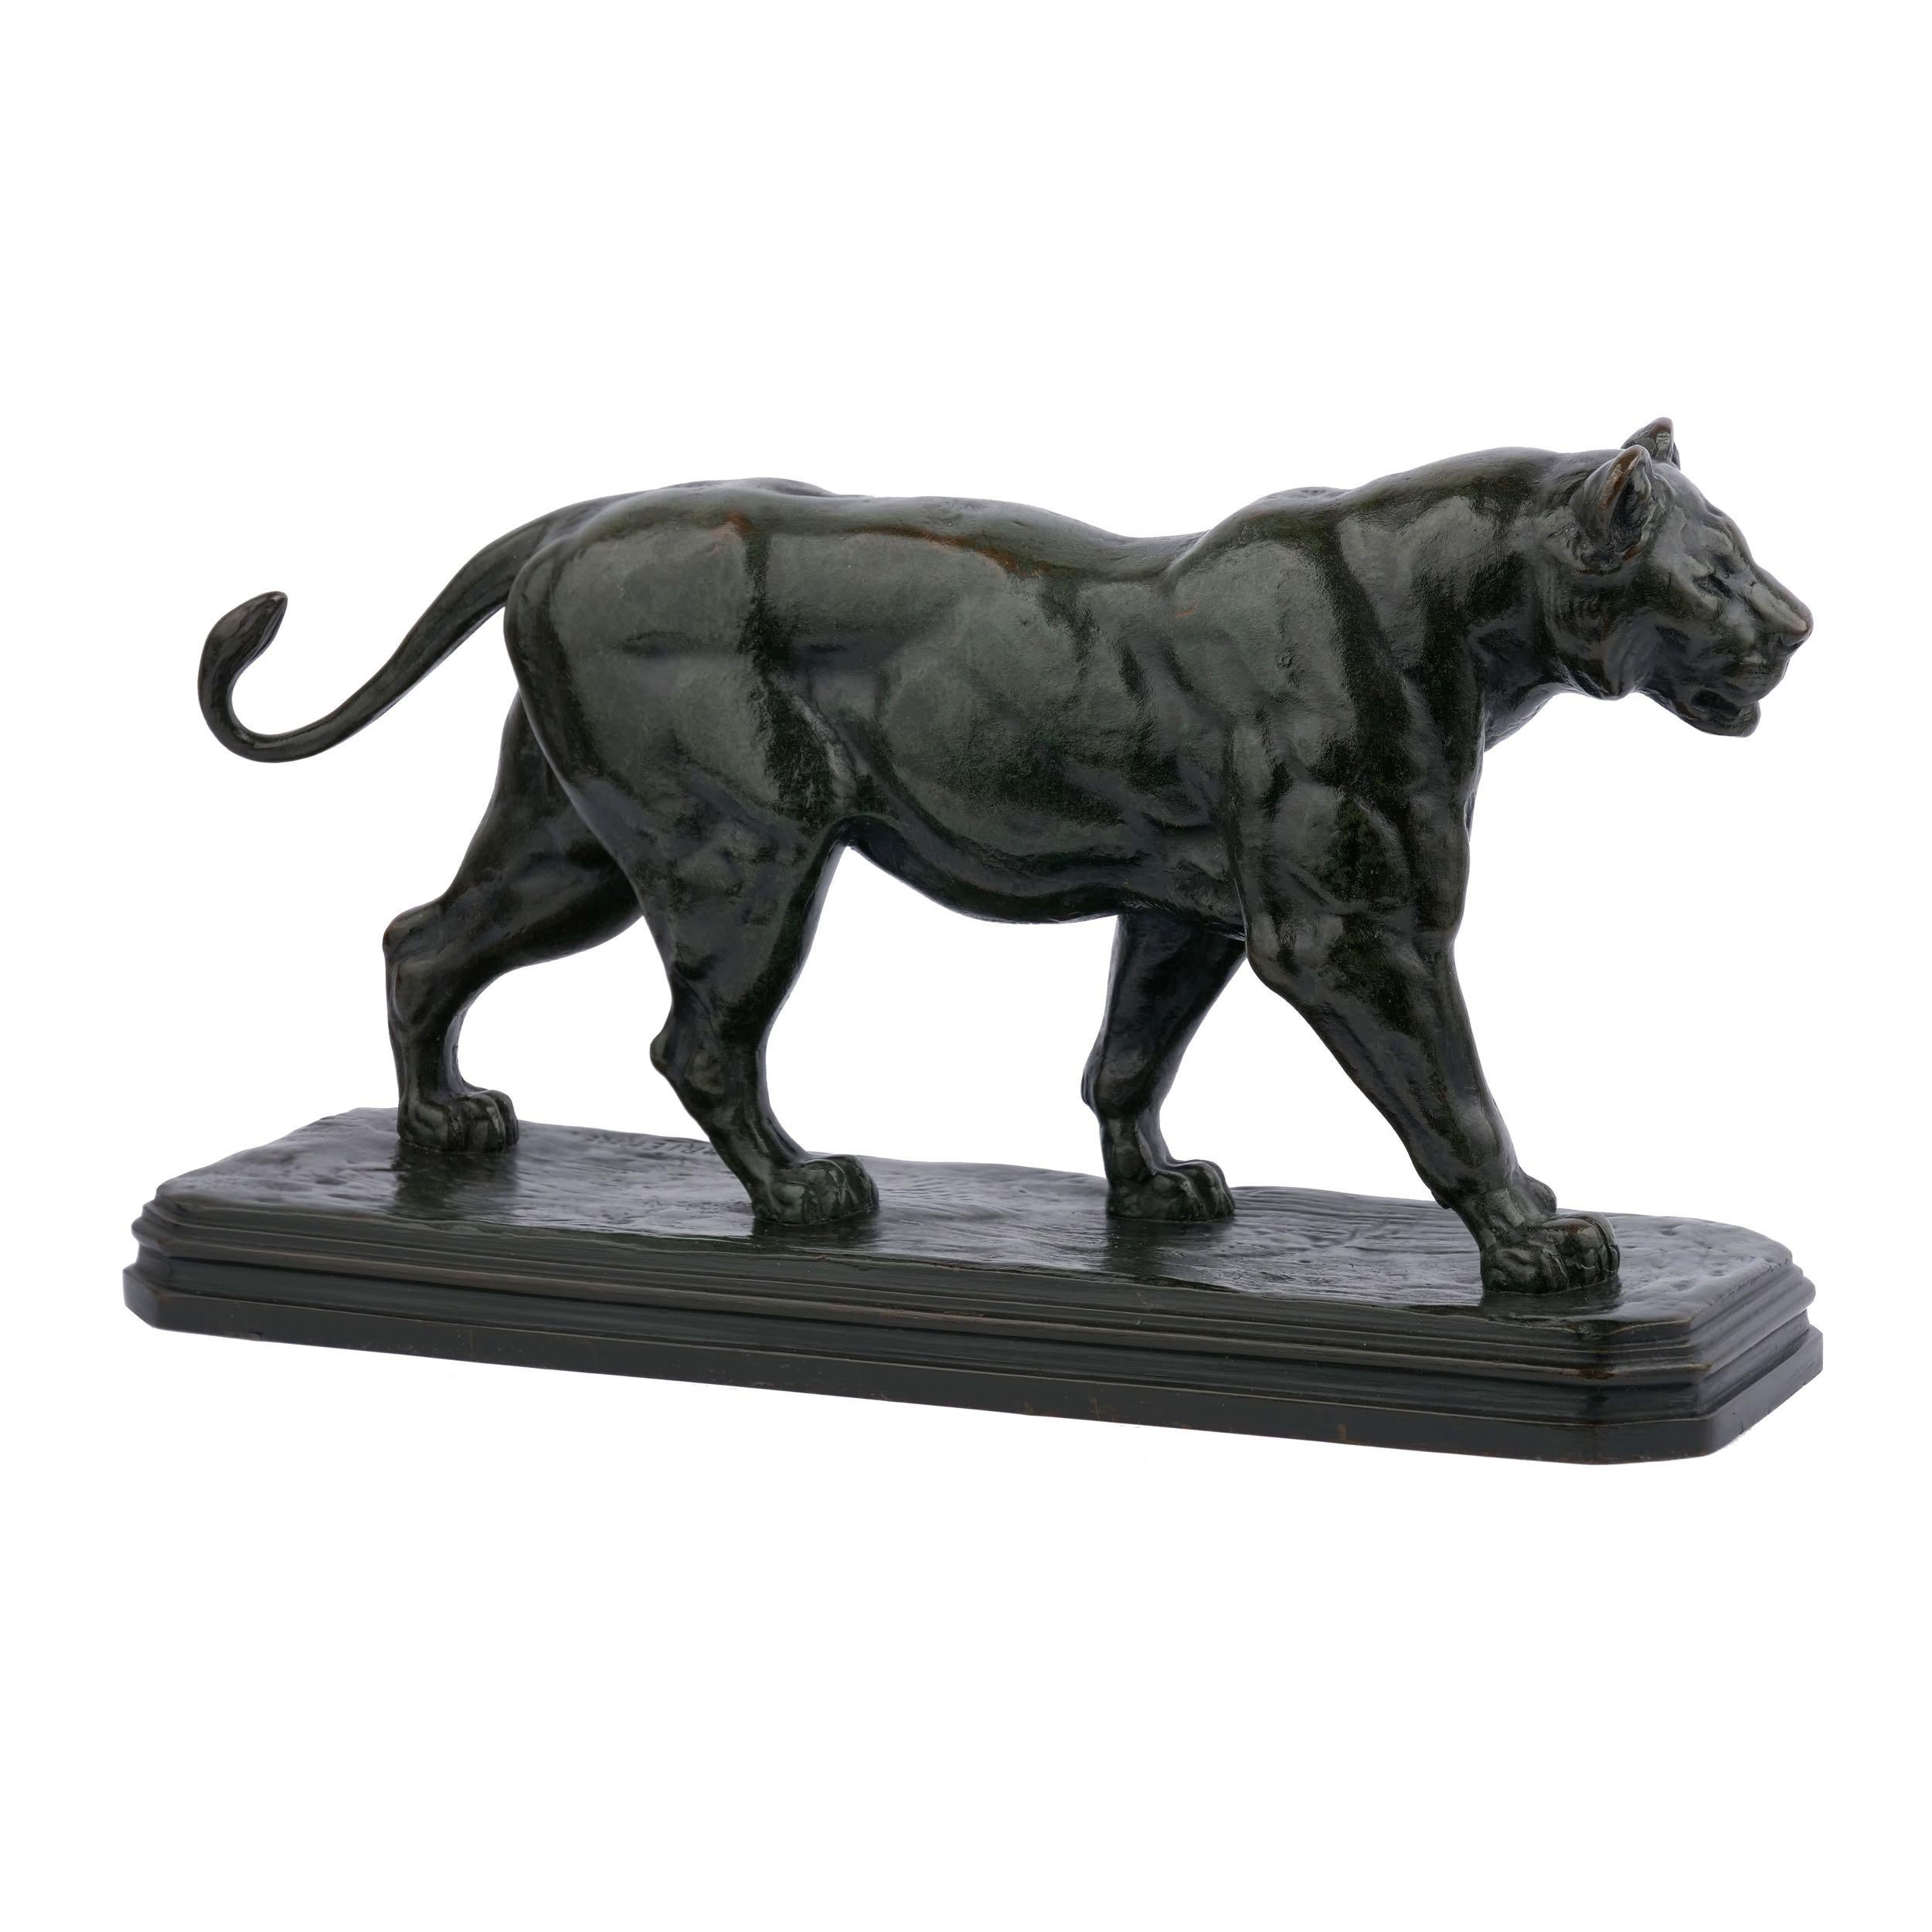 19th Century French Antique Bronze Sculpture of Marching Lion by Paul Edouard Delabrierre